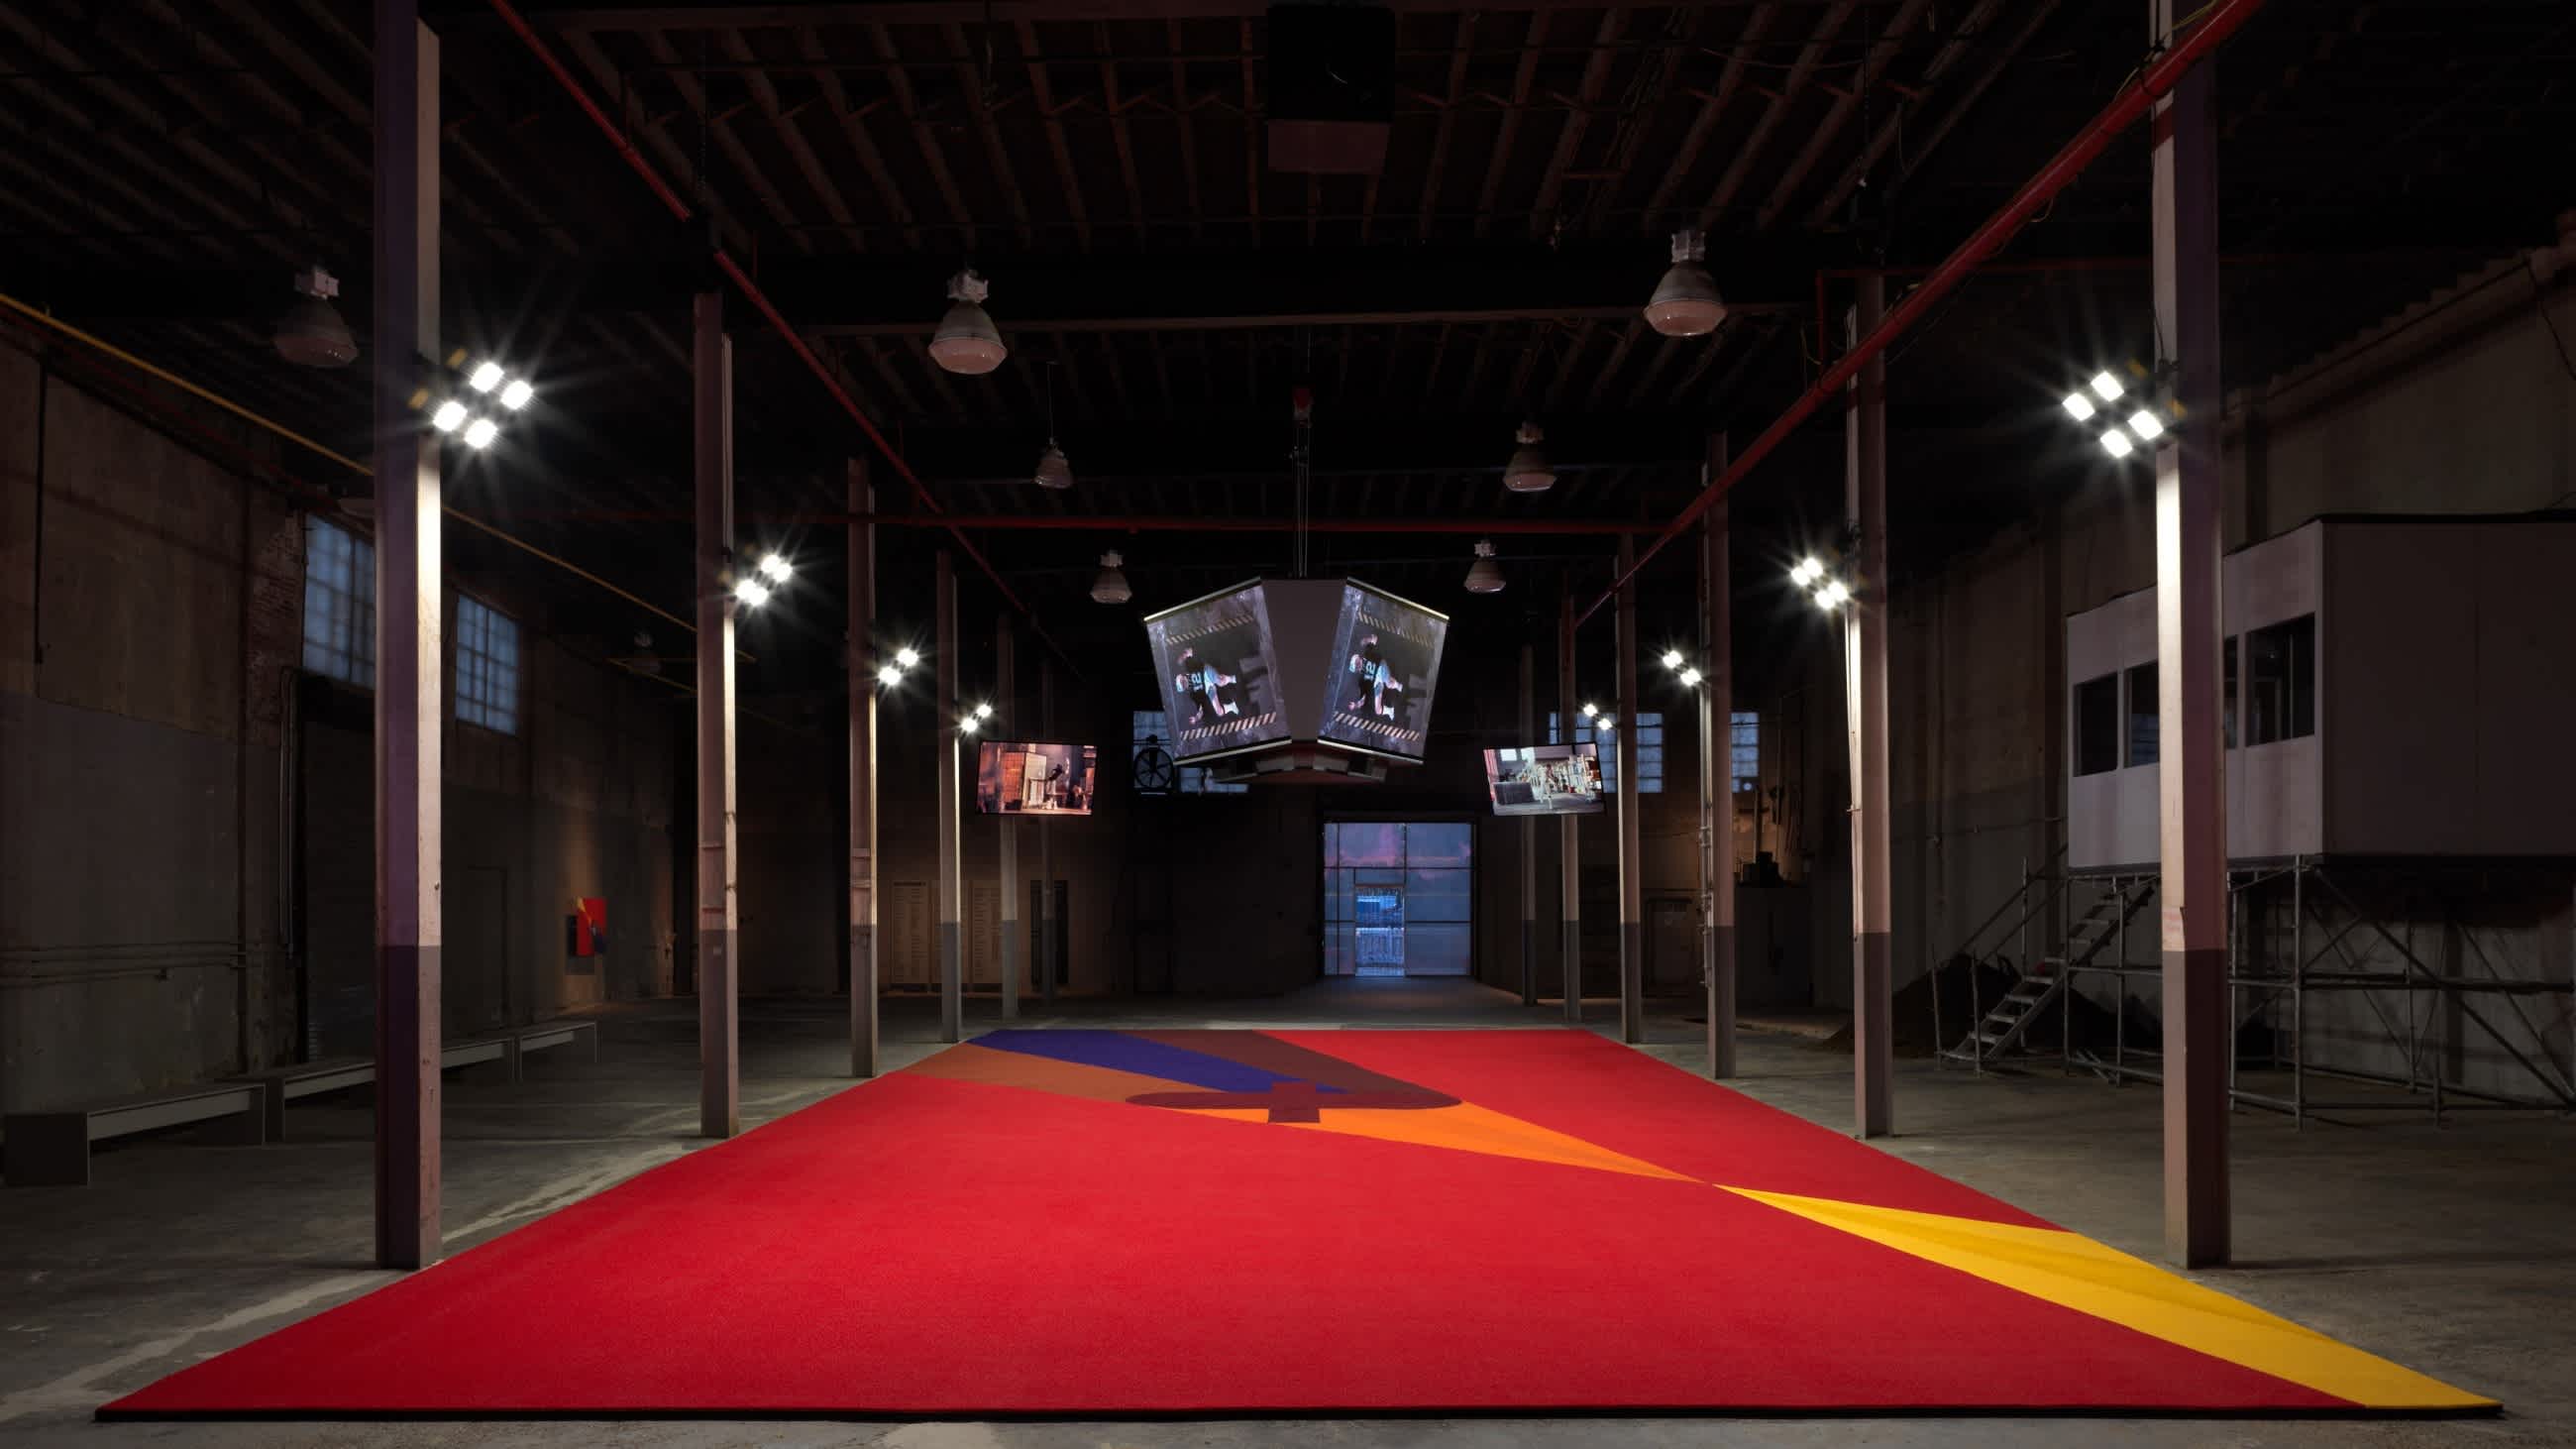 Still photo from the artist Matthew Barney's installation, 'Secondary'. A red, orange and blue carpet sits between rows of pillars within a warehouse. A sports jumbotron is suspended above the carpet. Football field lights are attached to the tops of the pillars. Barney has created a carpeted football field within a warehouse.